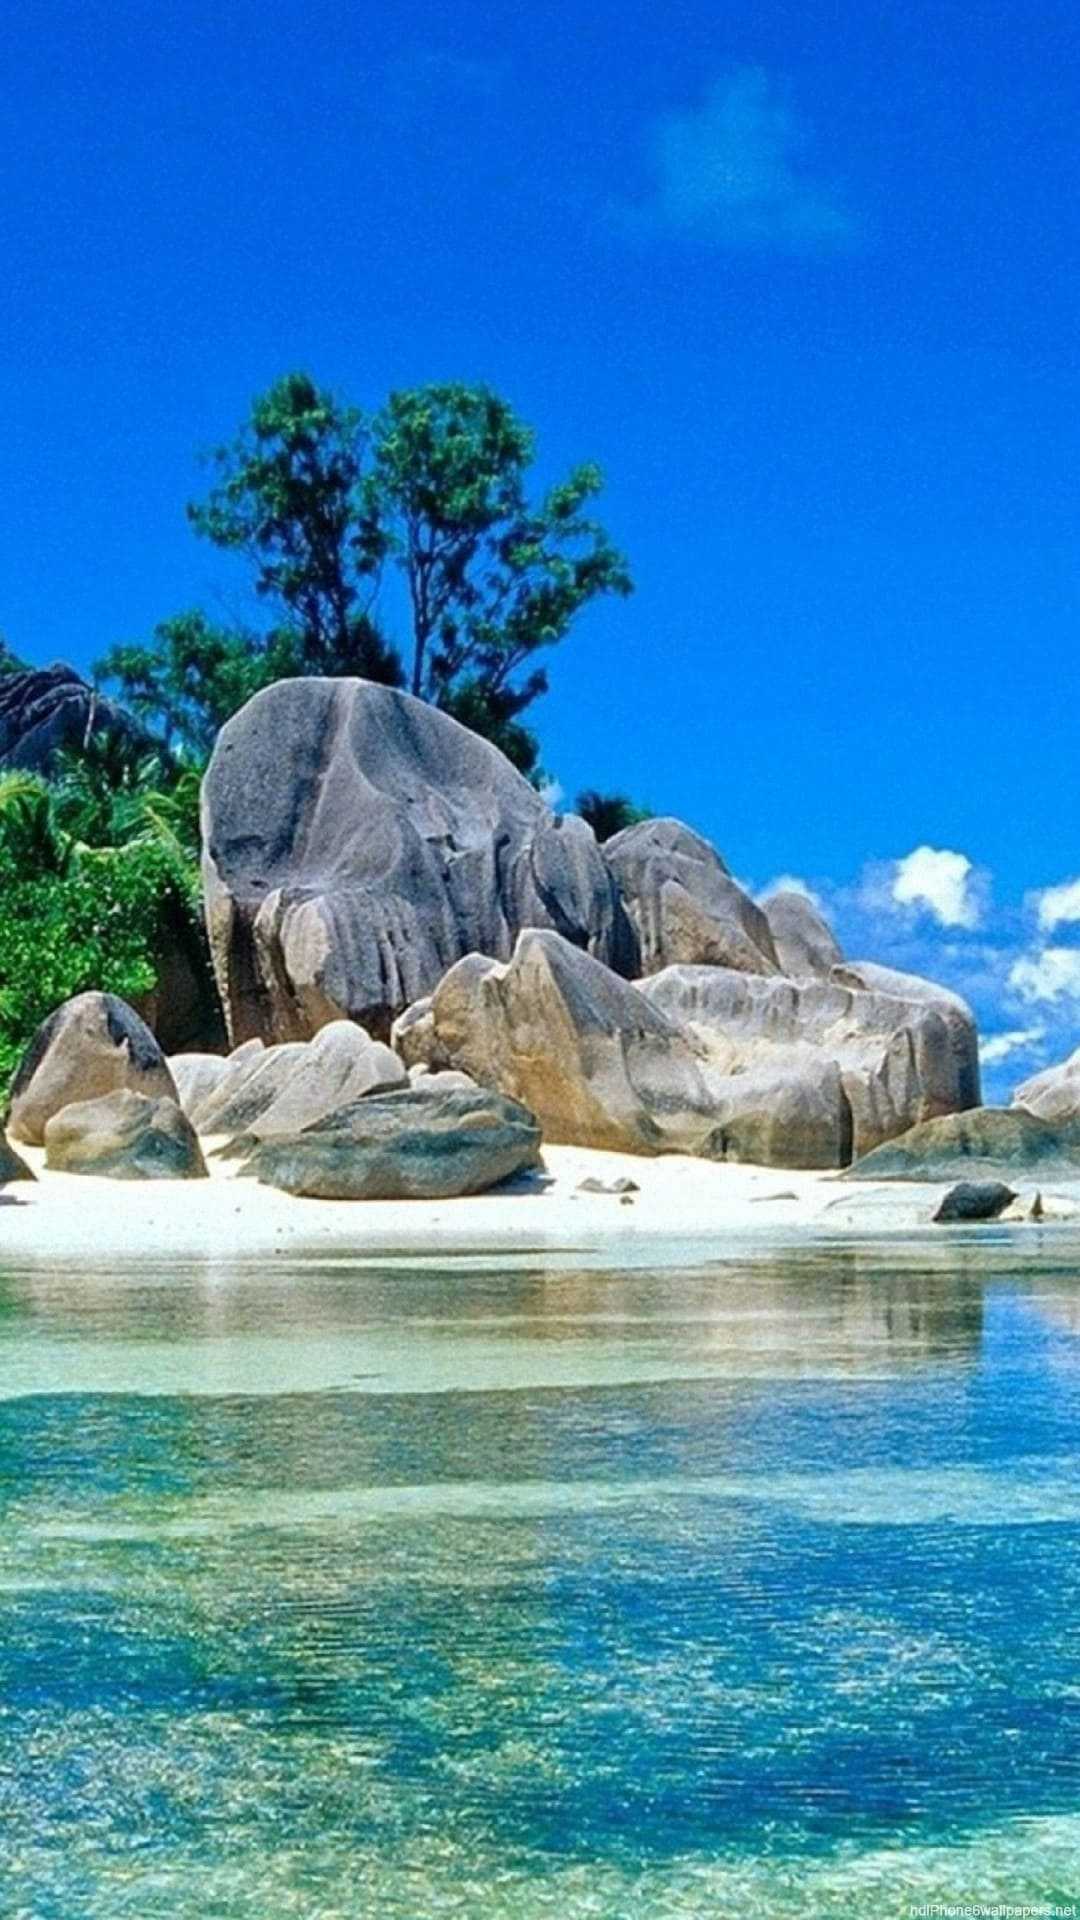 A beautiful beach with rocks and trees in the background - Tropical